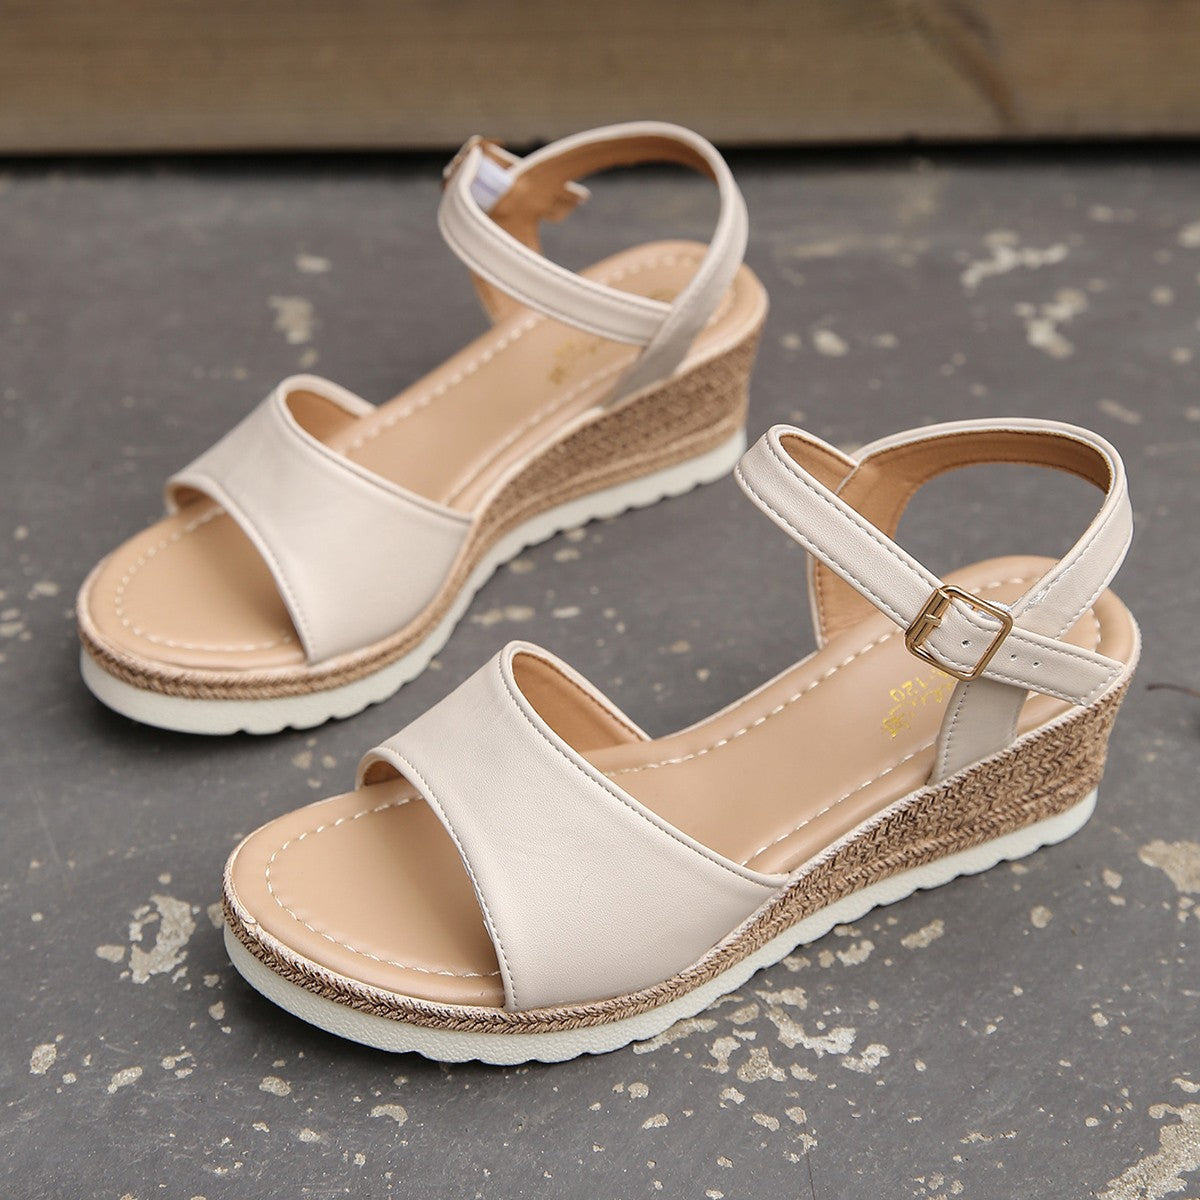 Ankle Buckle Wedges Sandals